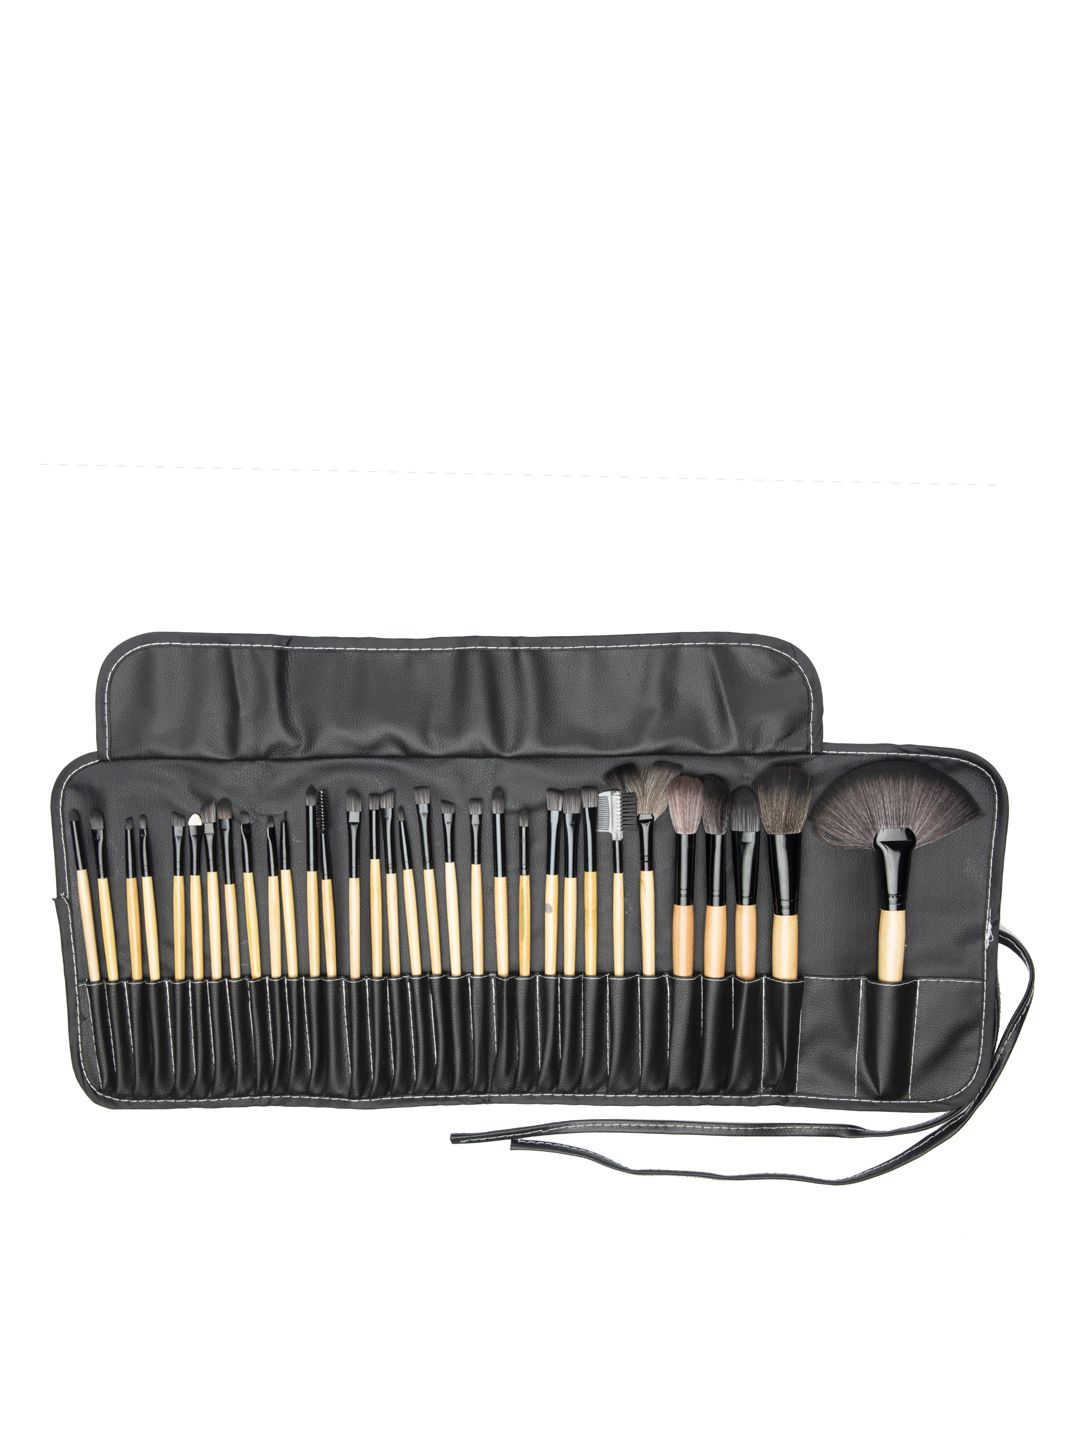 Agaro Set of 32 Professional Cosmetic Makeup Brushes with Case Price in India